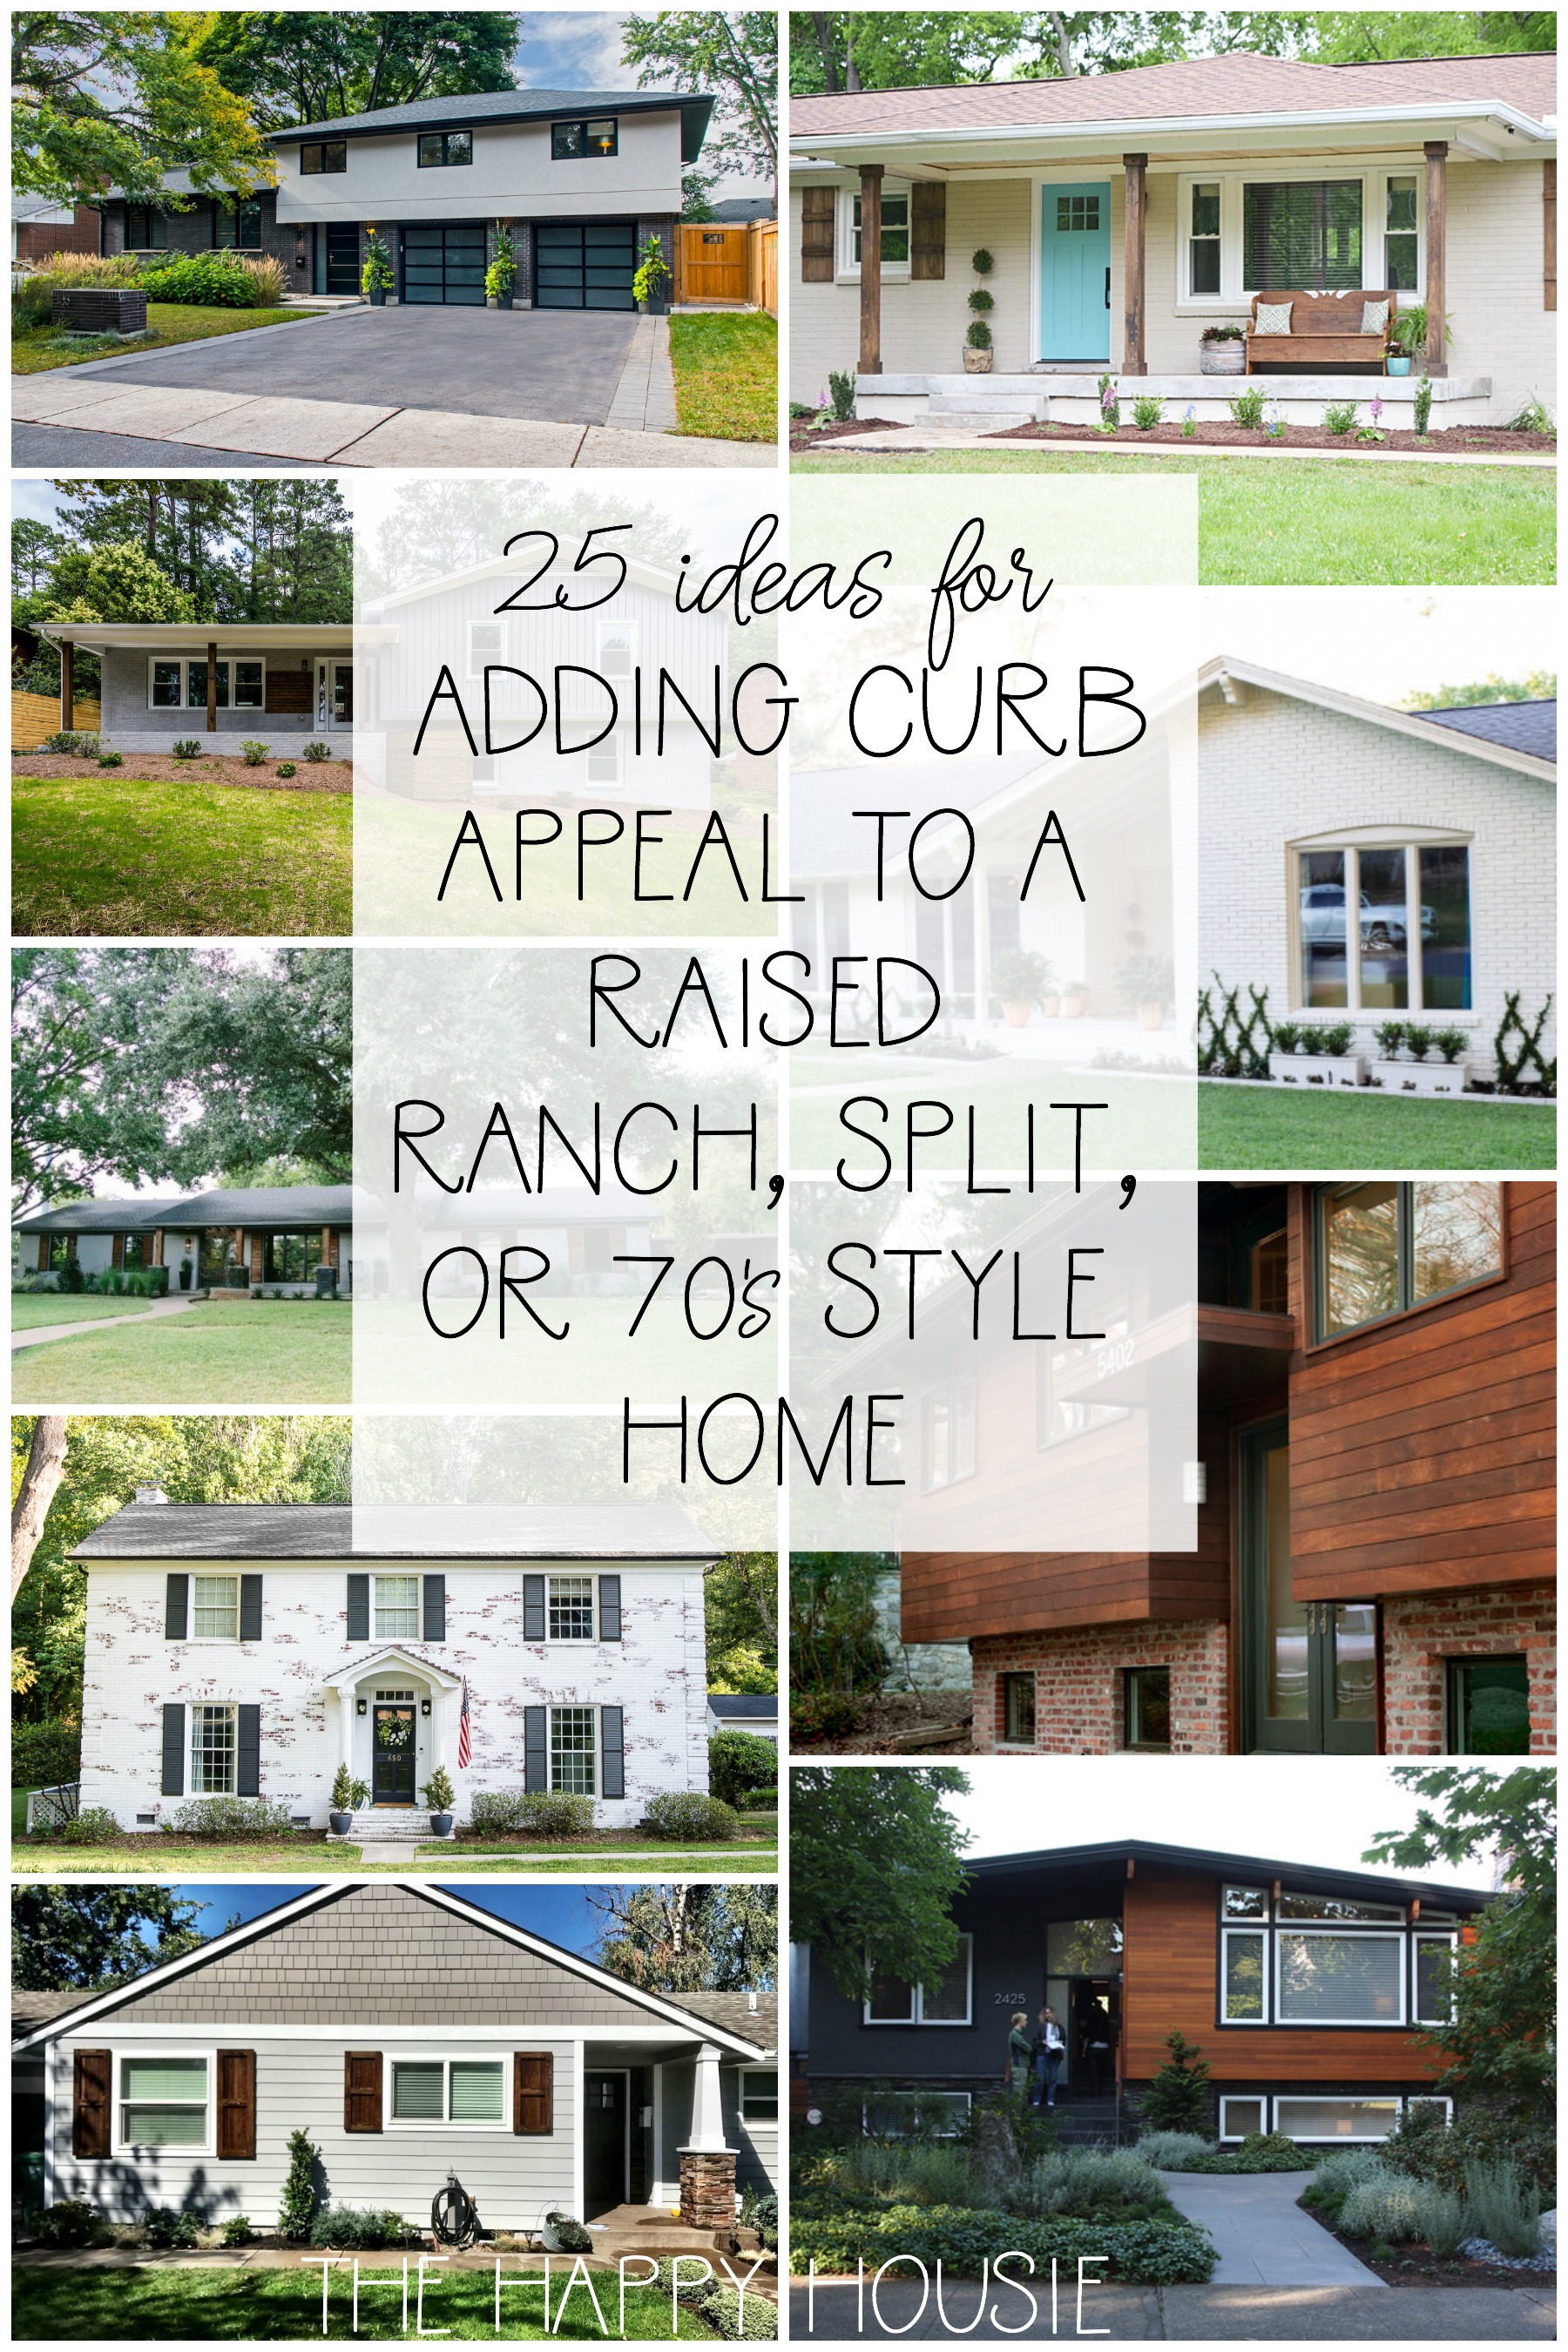 25 Ideas For Adding Curb Appeal To A Raised Ranch, Split, Or 70's Home poster.